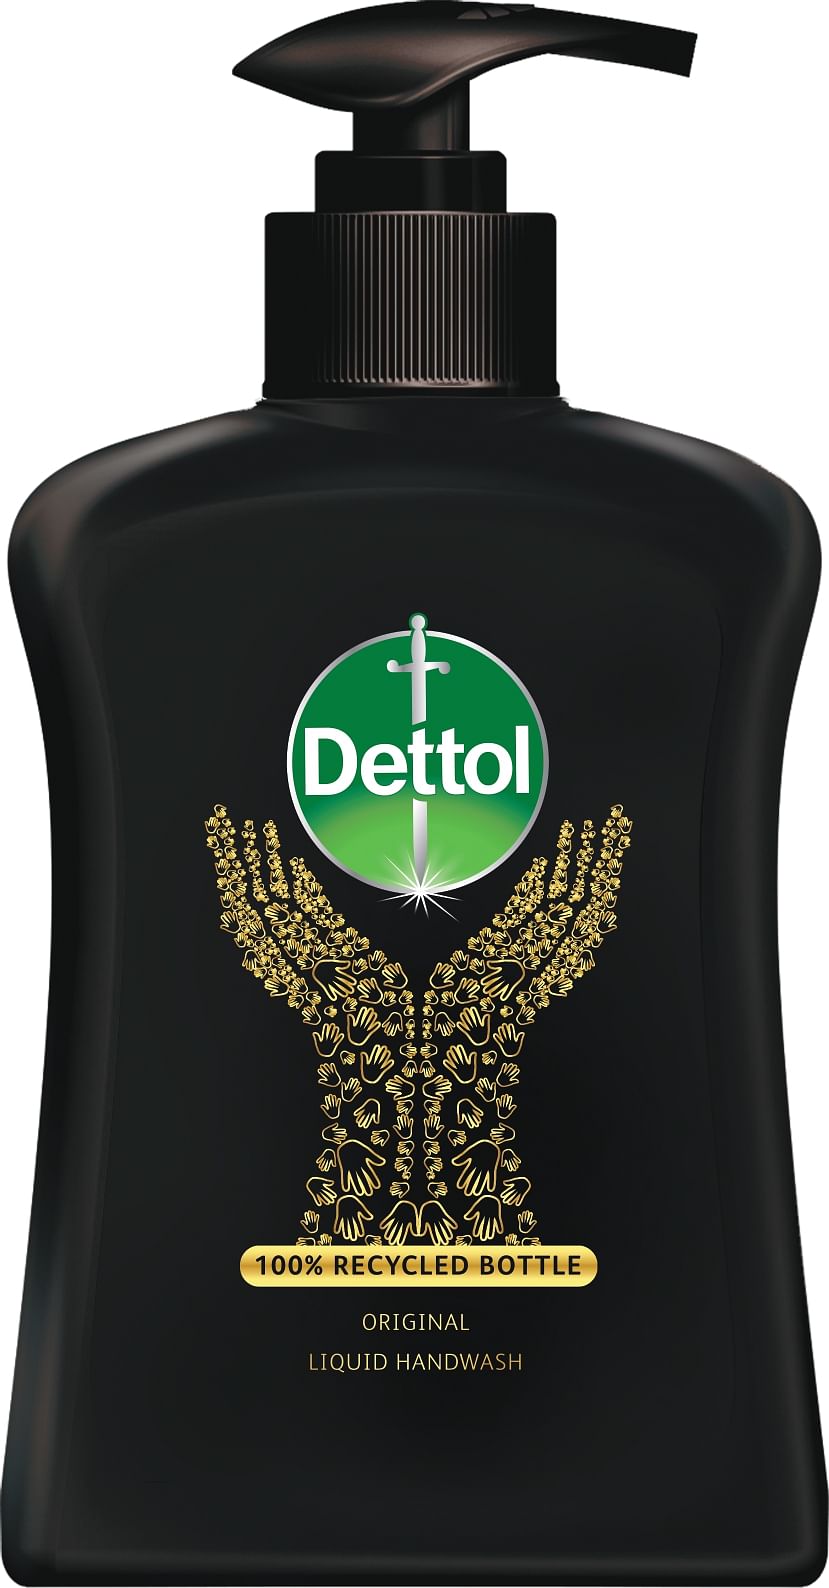 The new recycled packaging of Dettol Handwash